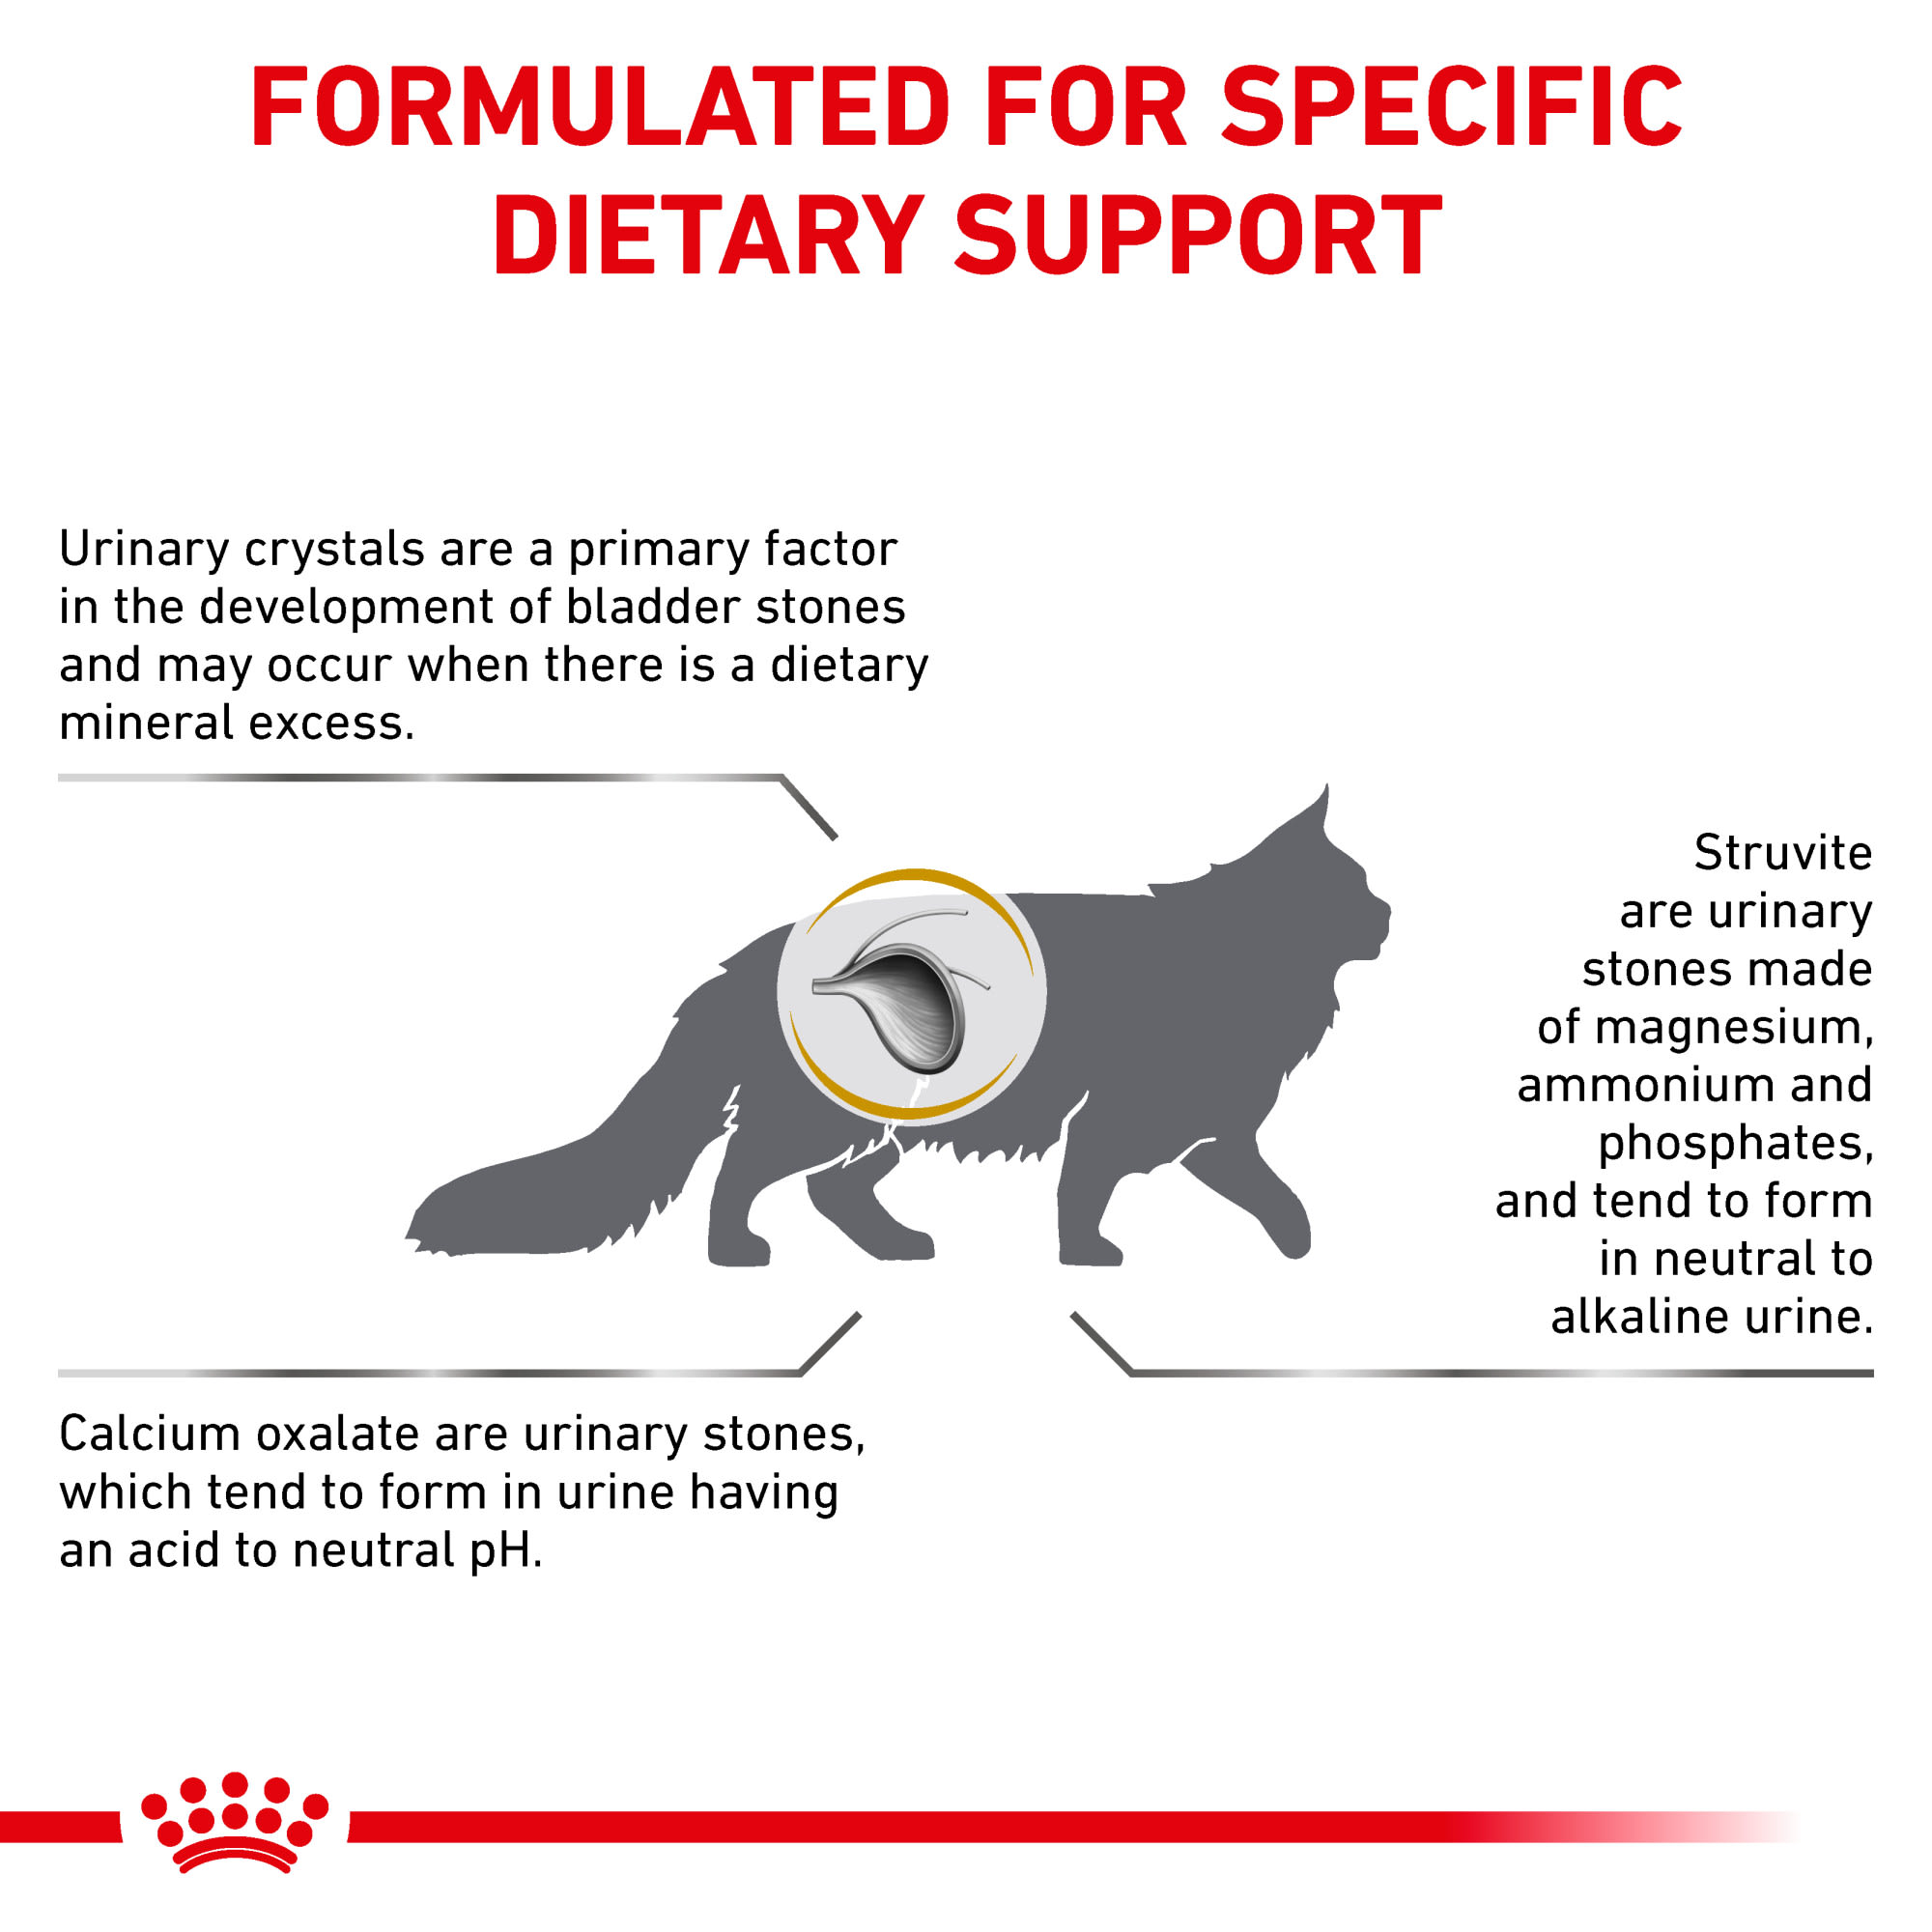 Royal Canin VDIET URINARY HIGH DILUTION FELINE 6KG - Petgamma